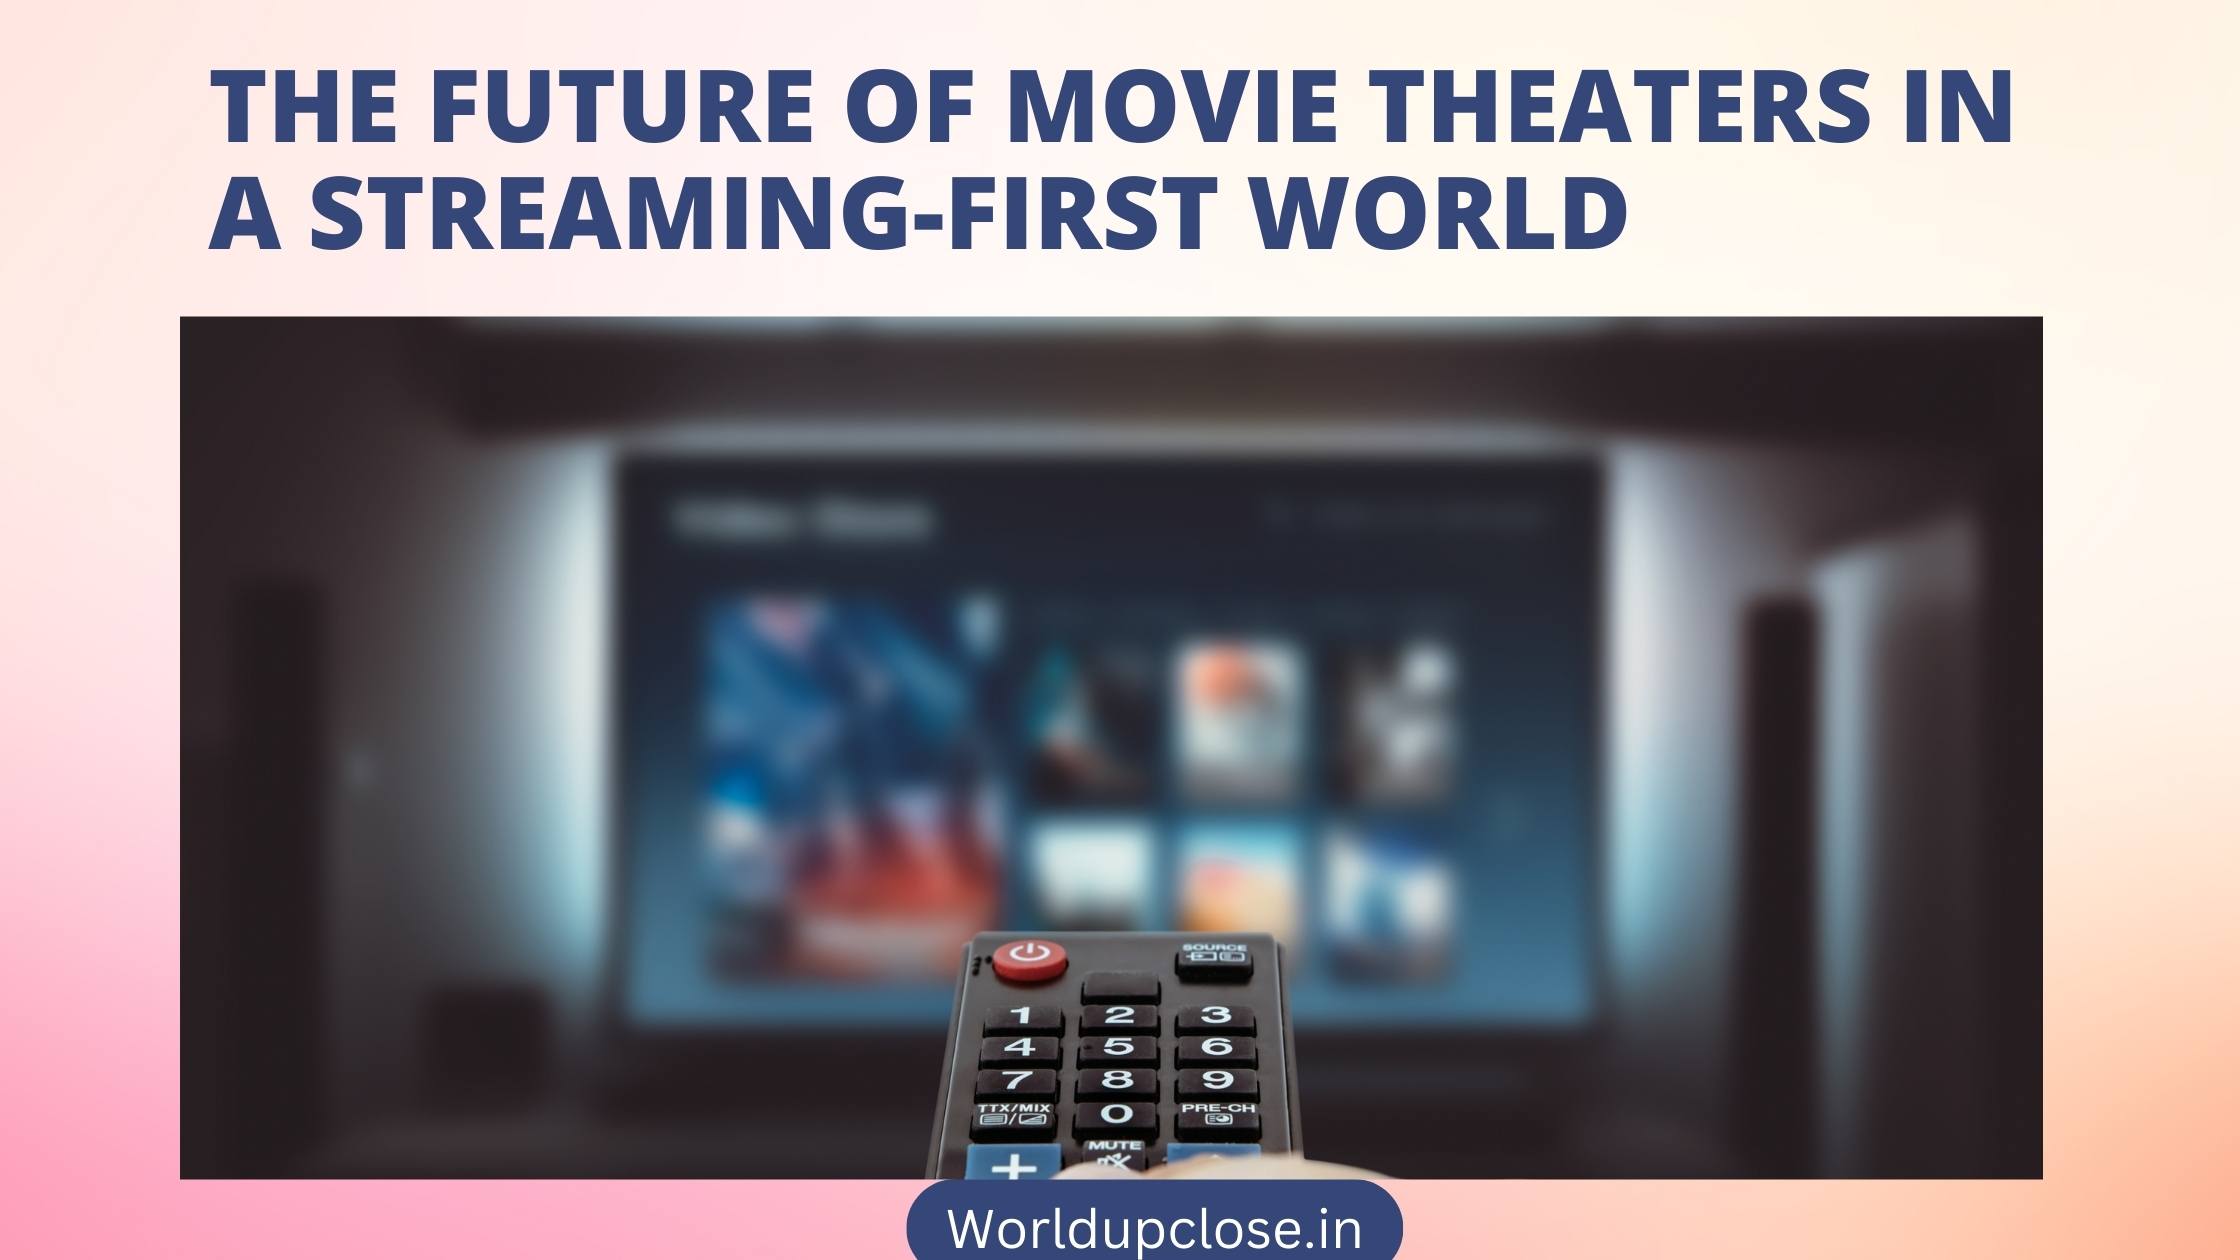 The Future of Movie Theatres in a Streaming-First World 2